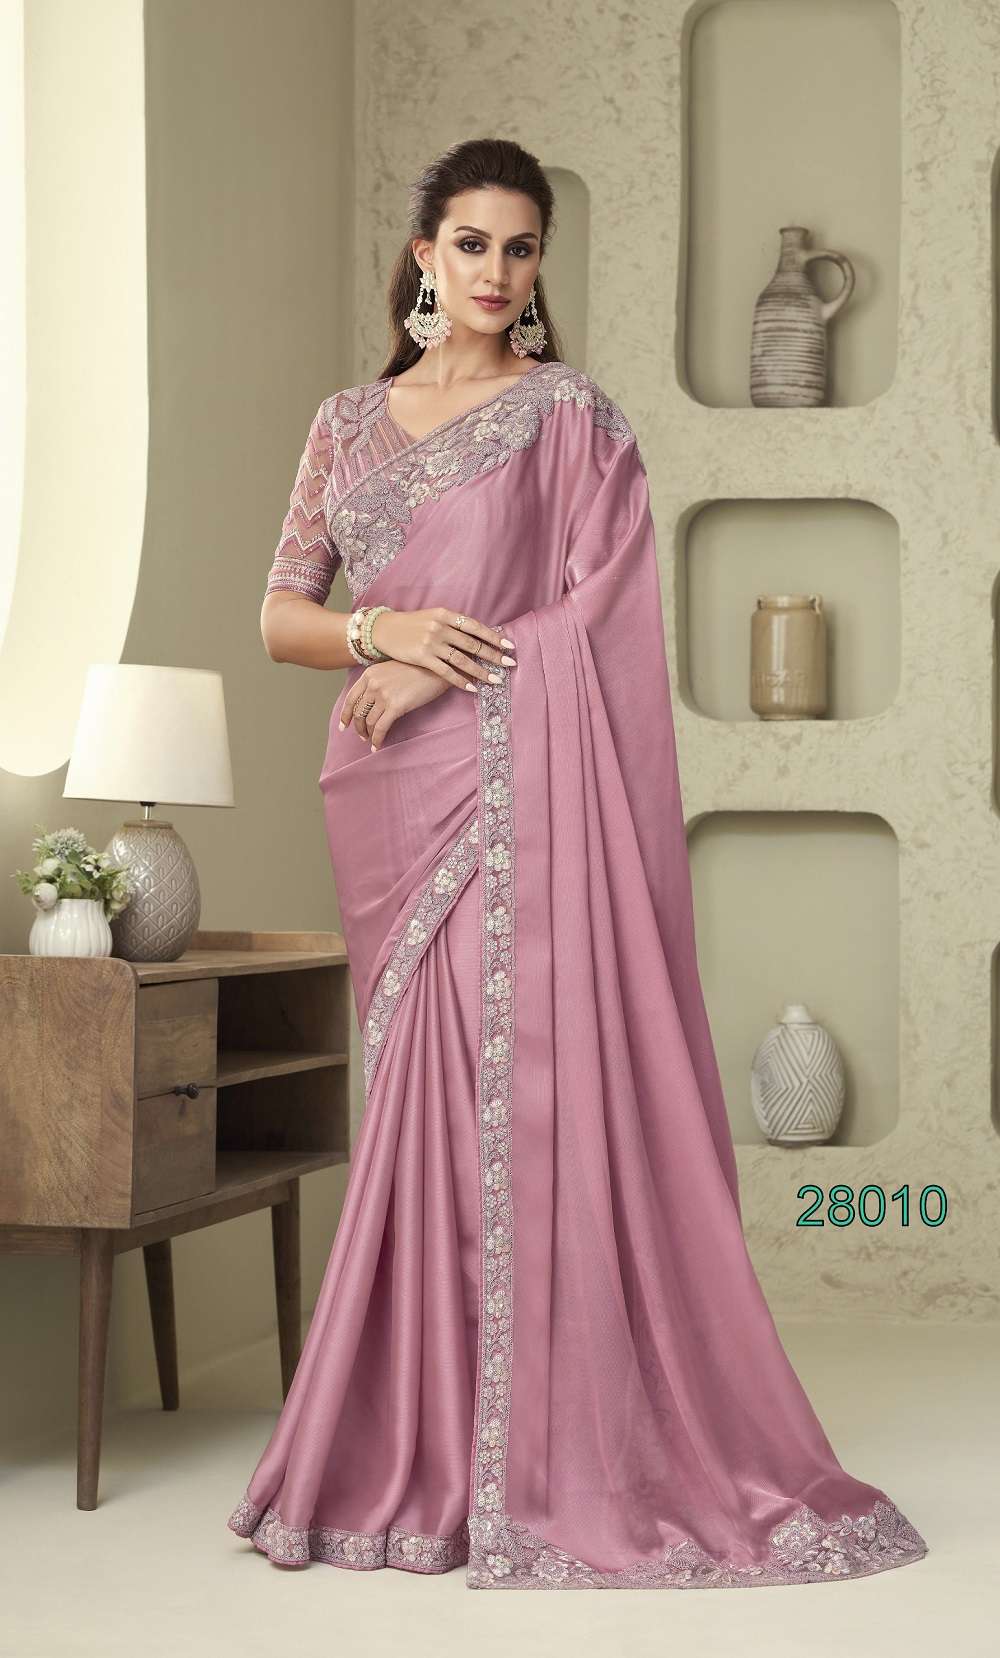 Tfh Presents Silver Screen 18th Edition Fancy Designer Party Wear Saree Catalog Wholesaler And Exporter In Surat 